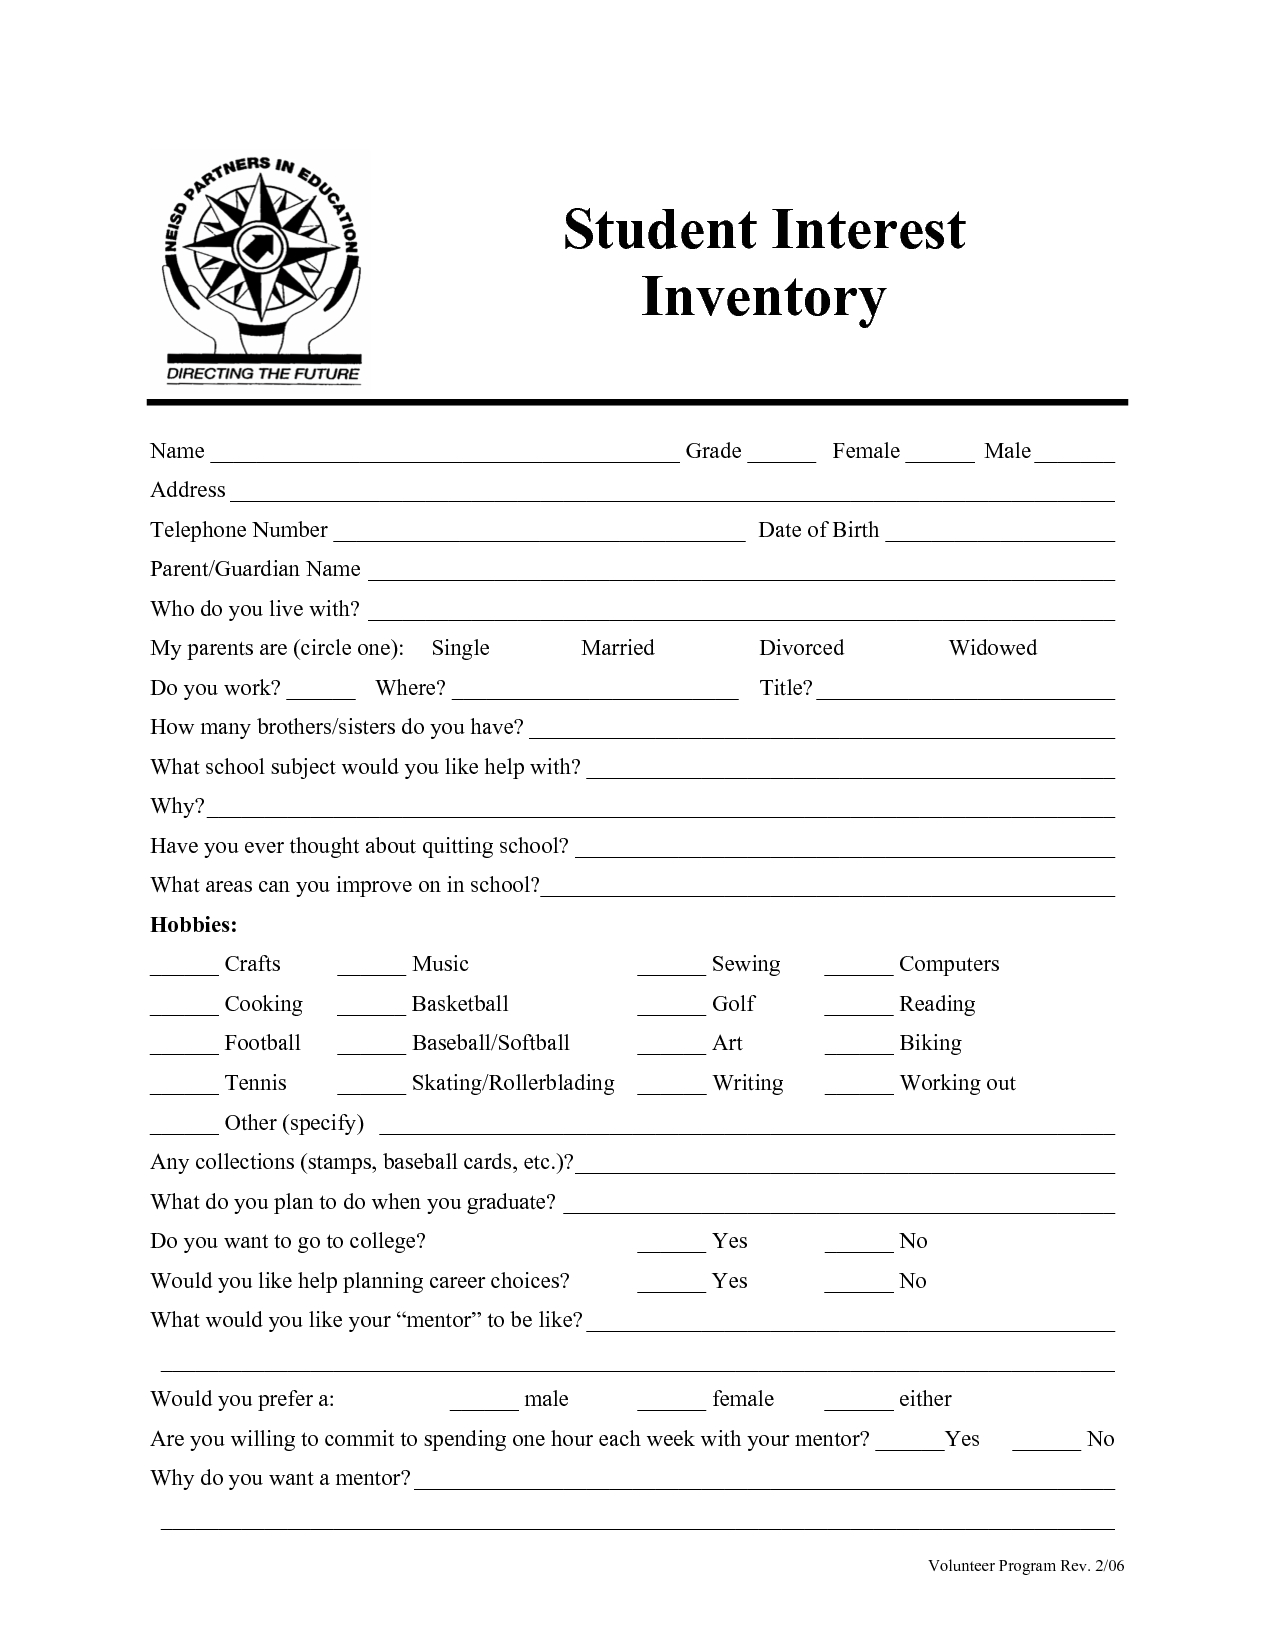 free-printable-career-interest-inventory-for-students-printable-templates